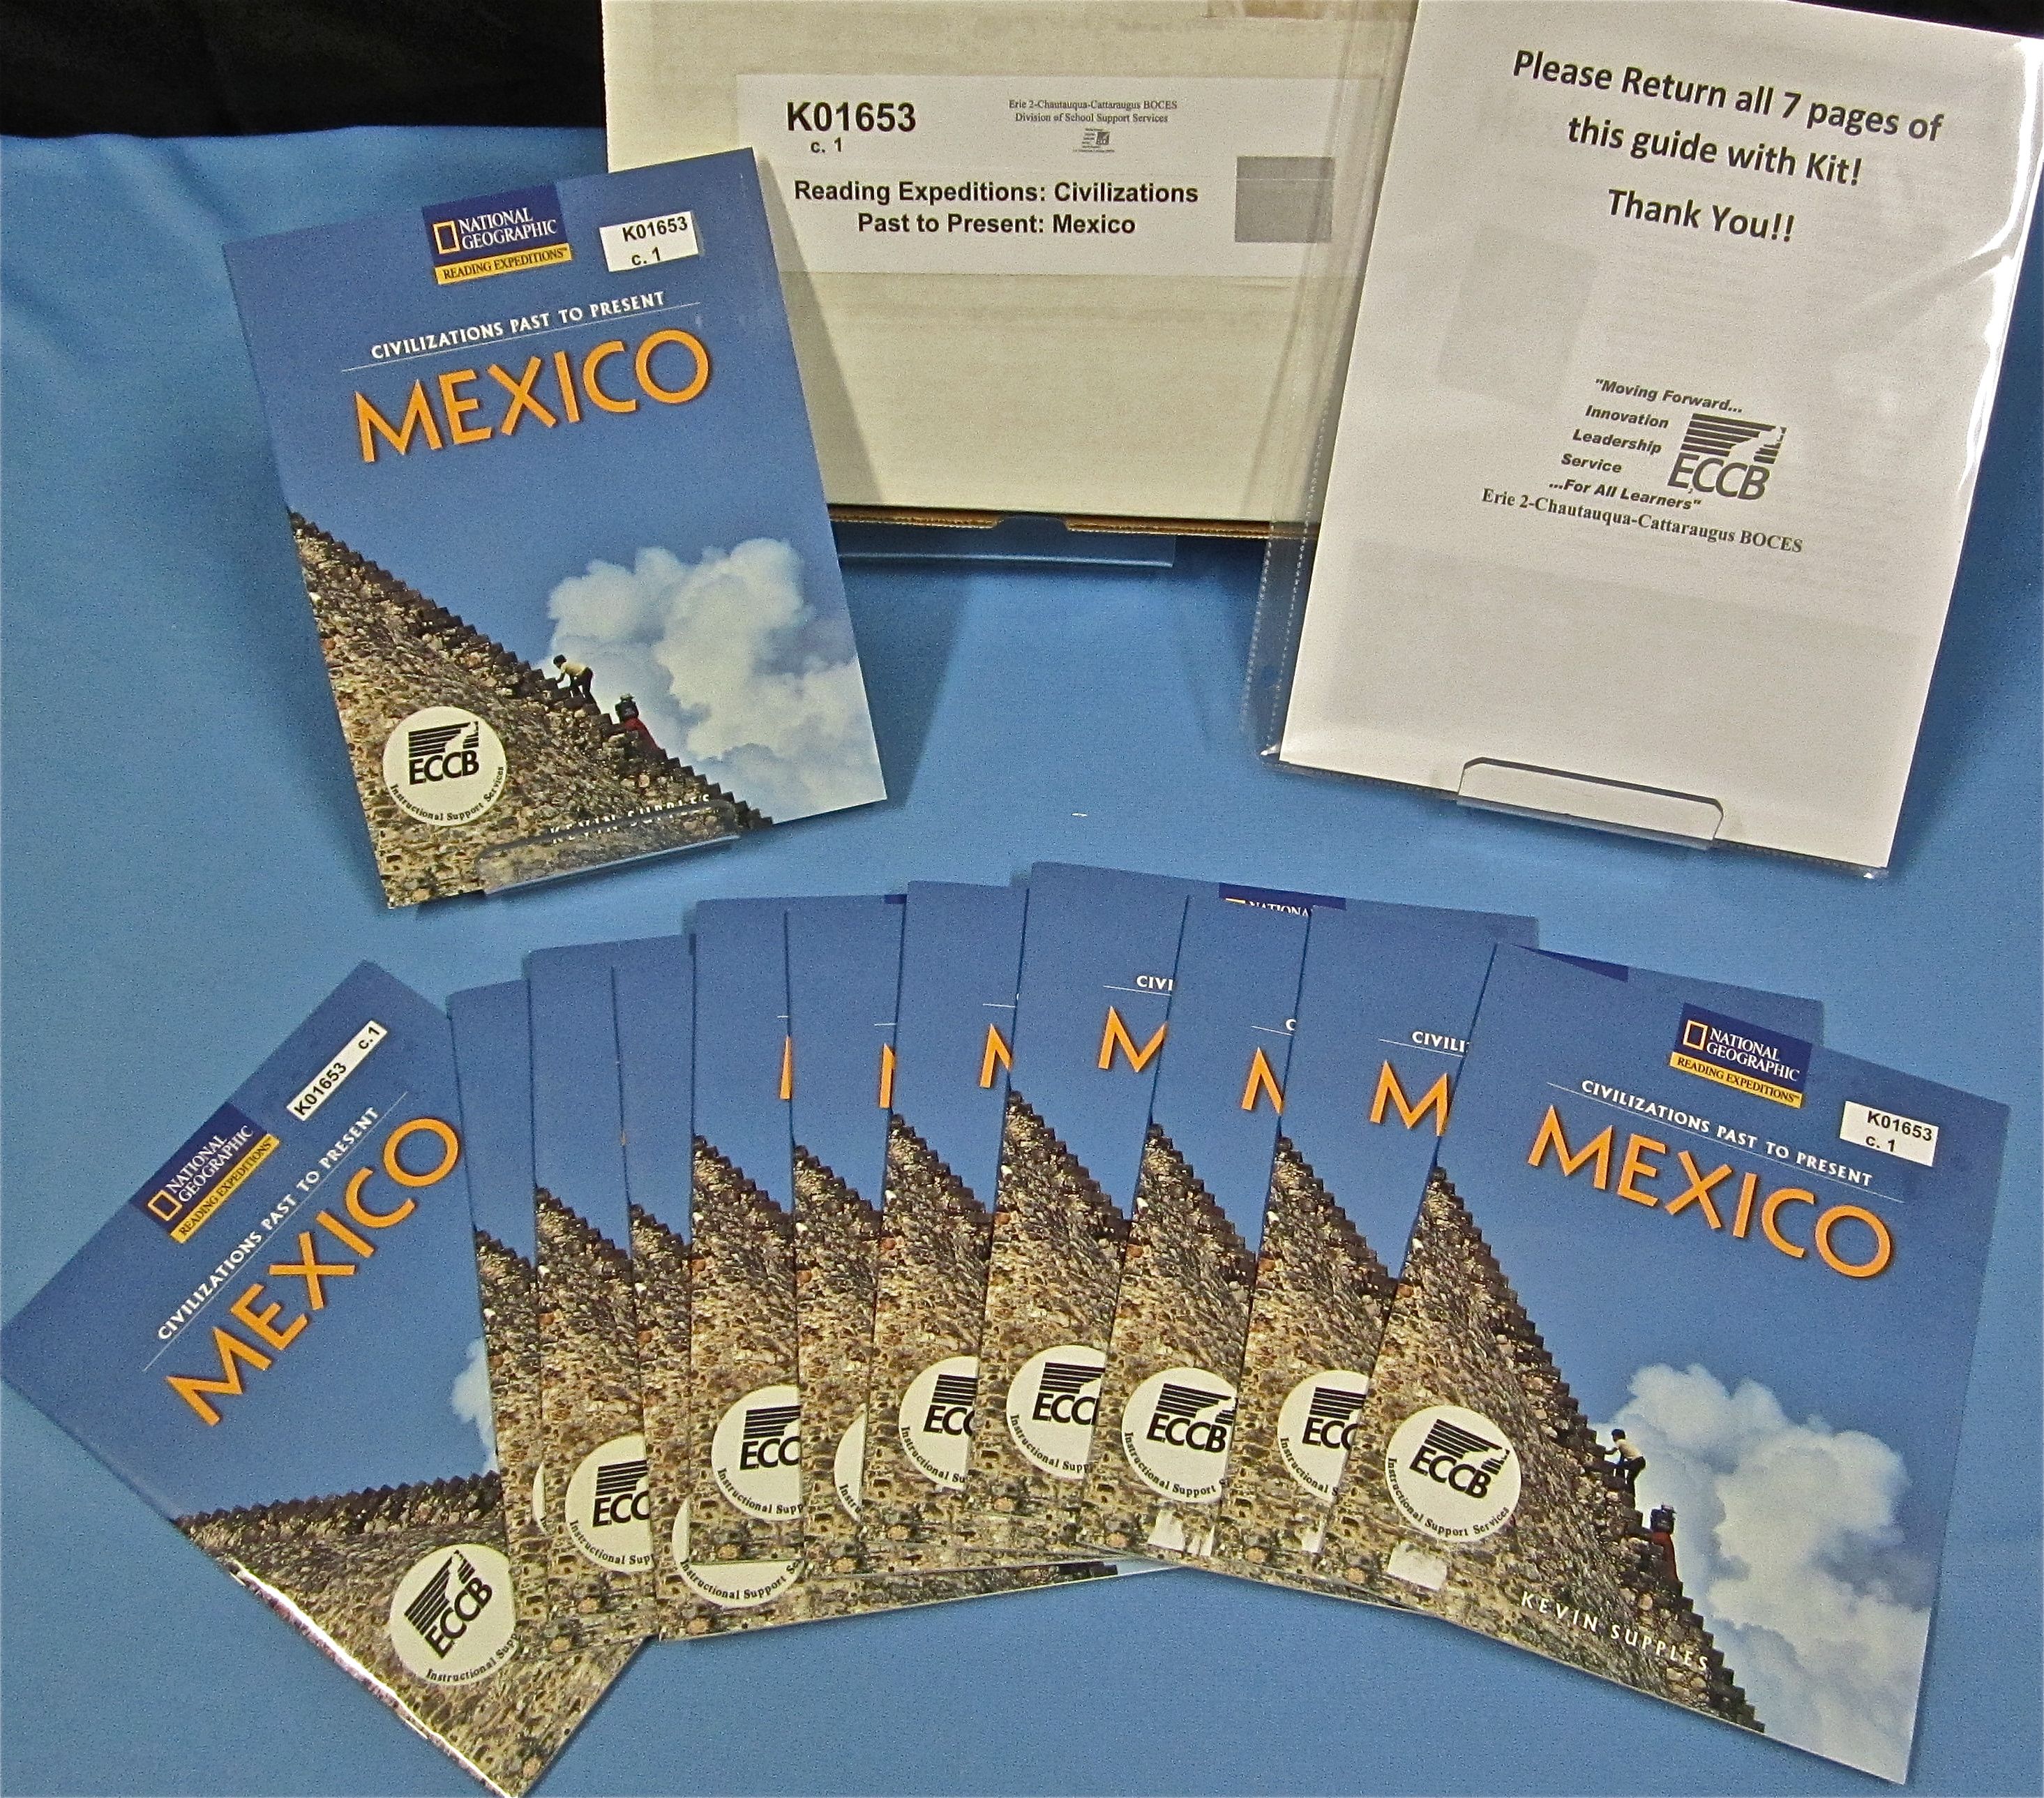 Reading Expeditions: Civilizations Past to Present: Mexico